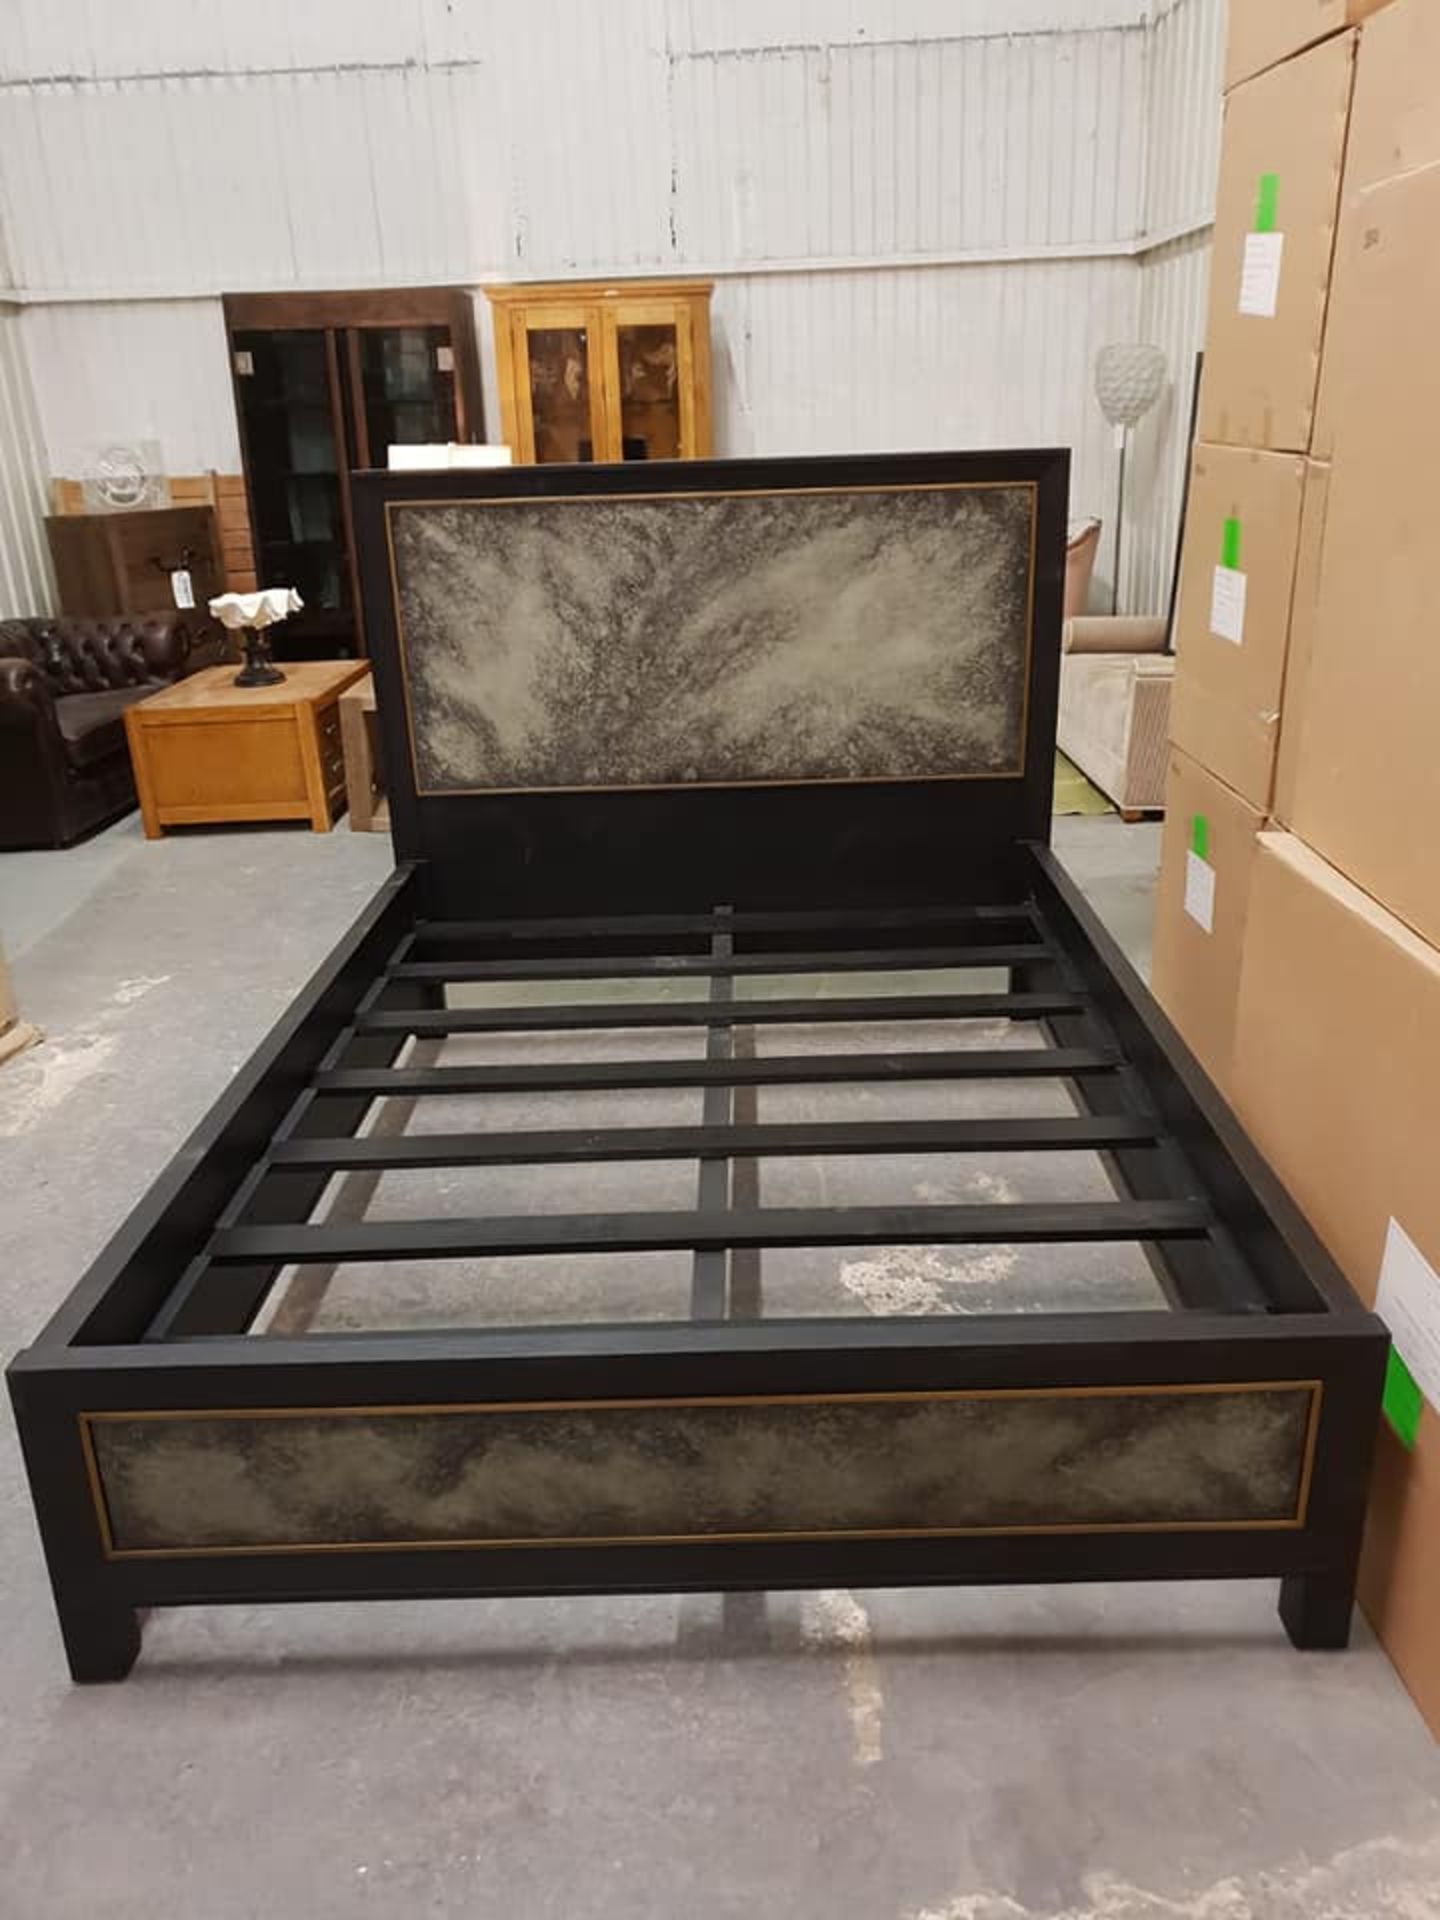 Bed - Levi UK King Size Bed ( Mattress Not Included) Art Deco Style Designer Bed Frame With Ebonized - Image 2 of 5